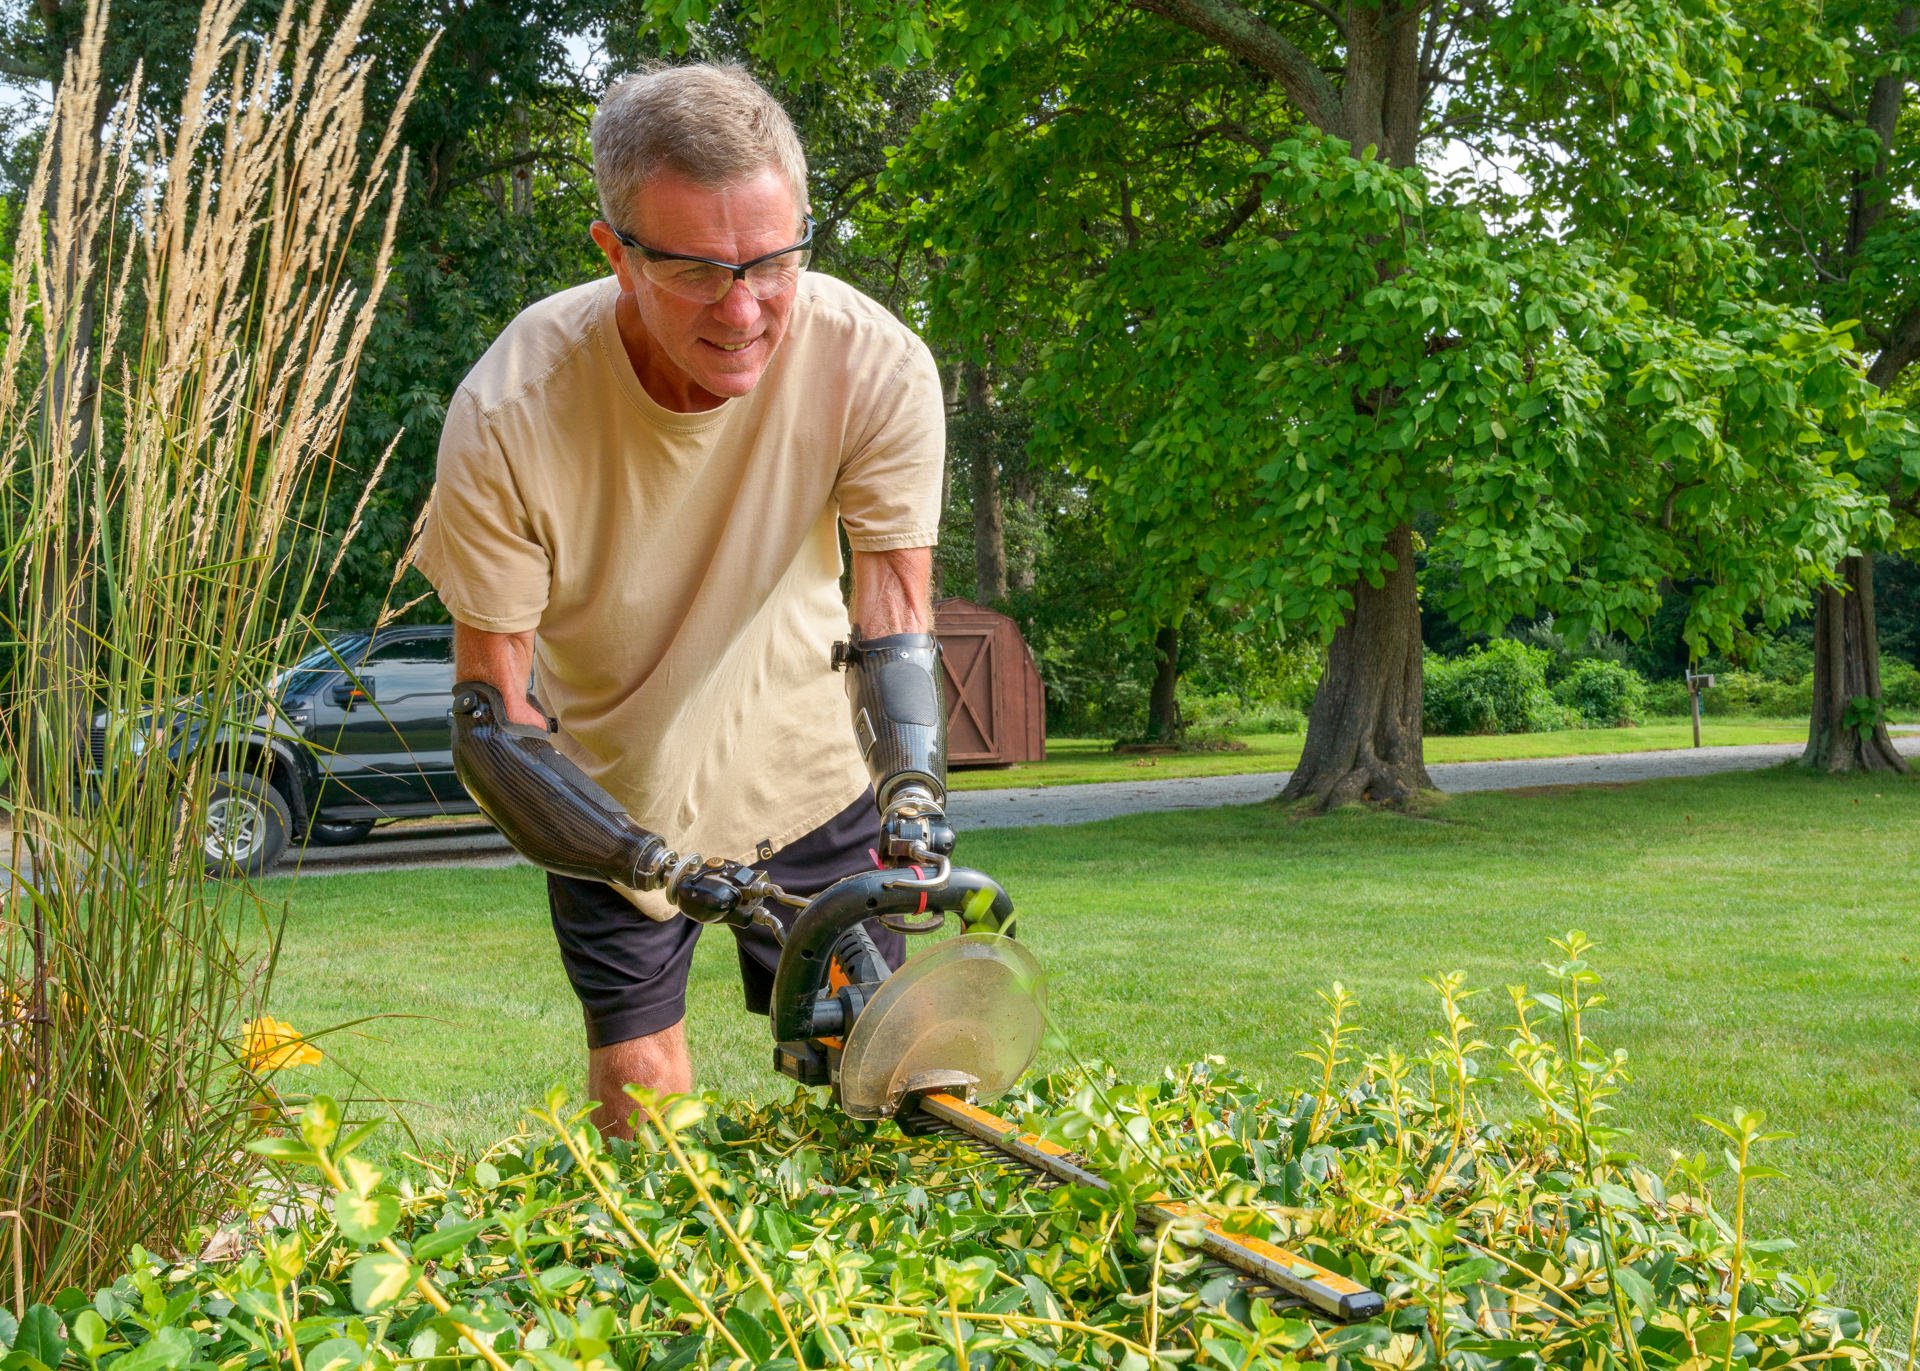 A bilateral transradial patient, Gerry Kinney uses his electrically-powered ETDs when working in the yard.